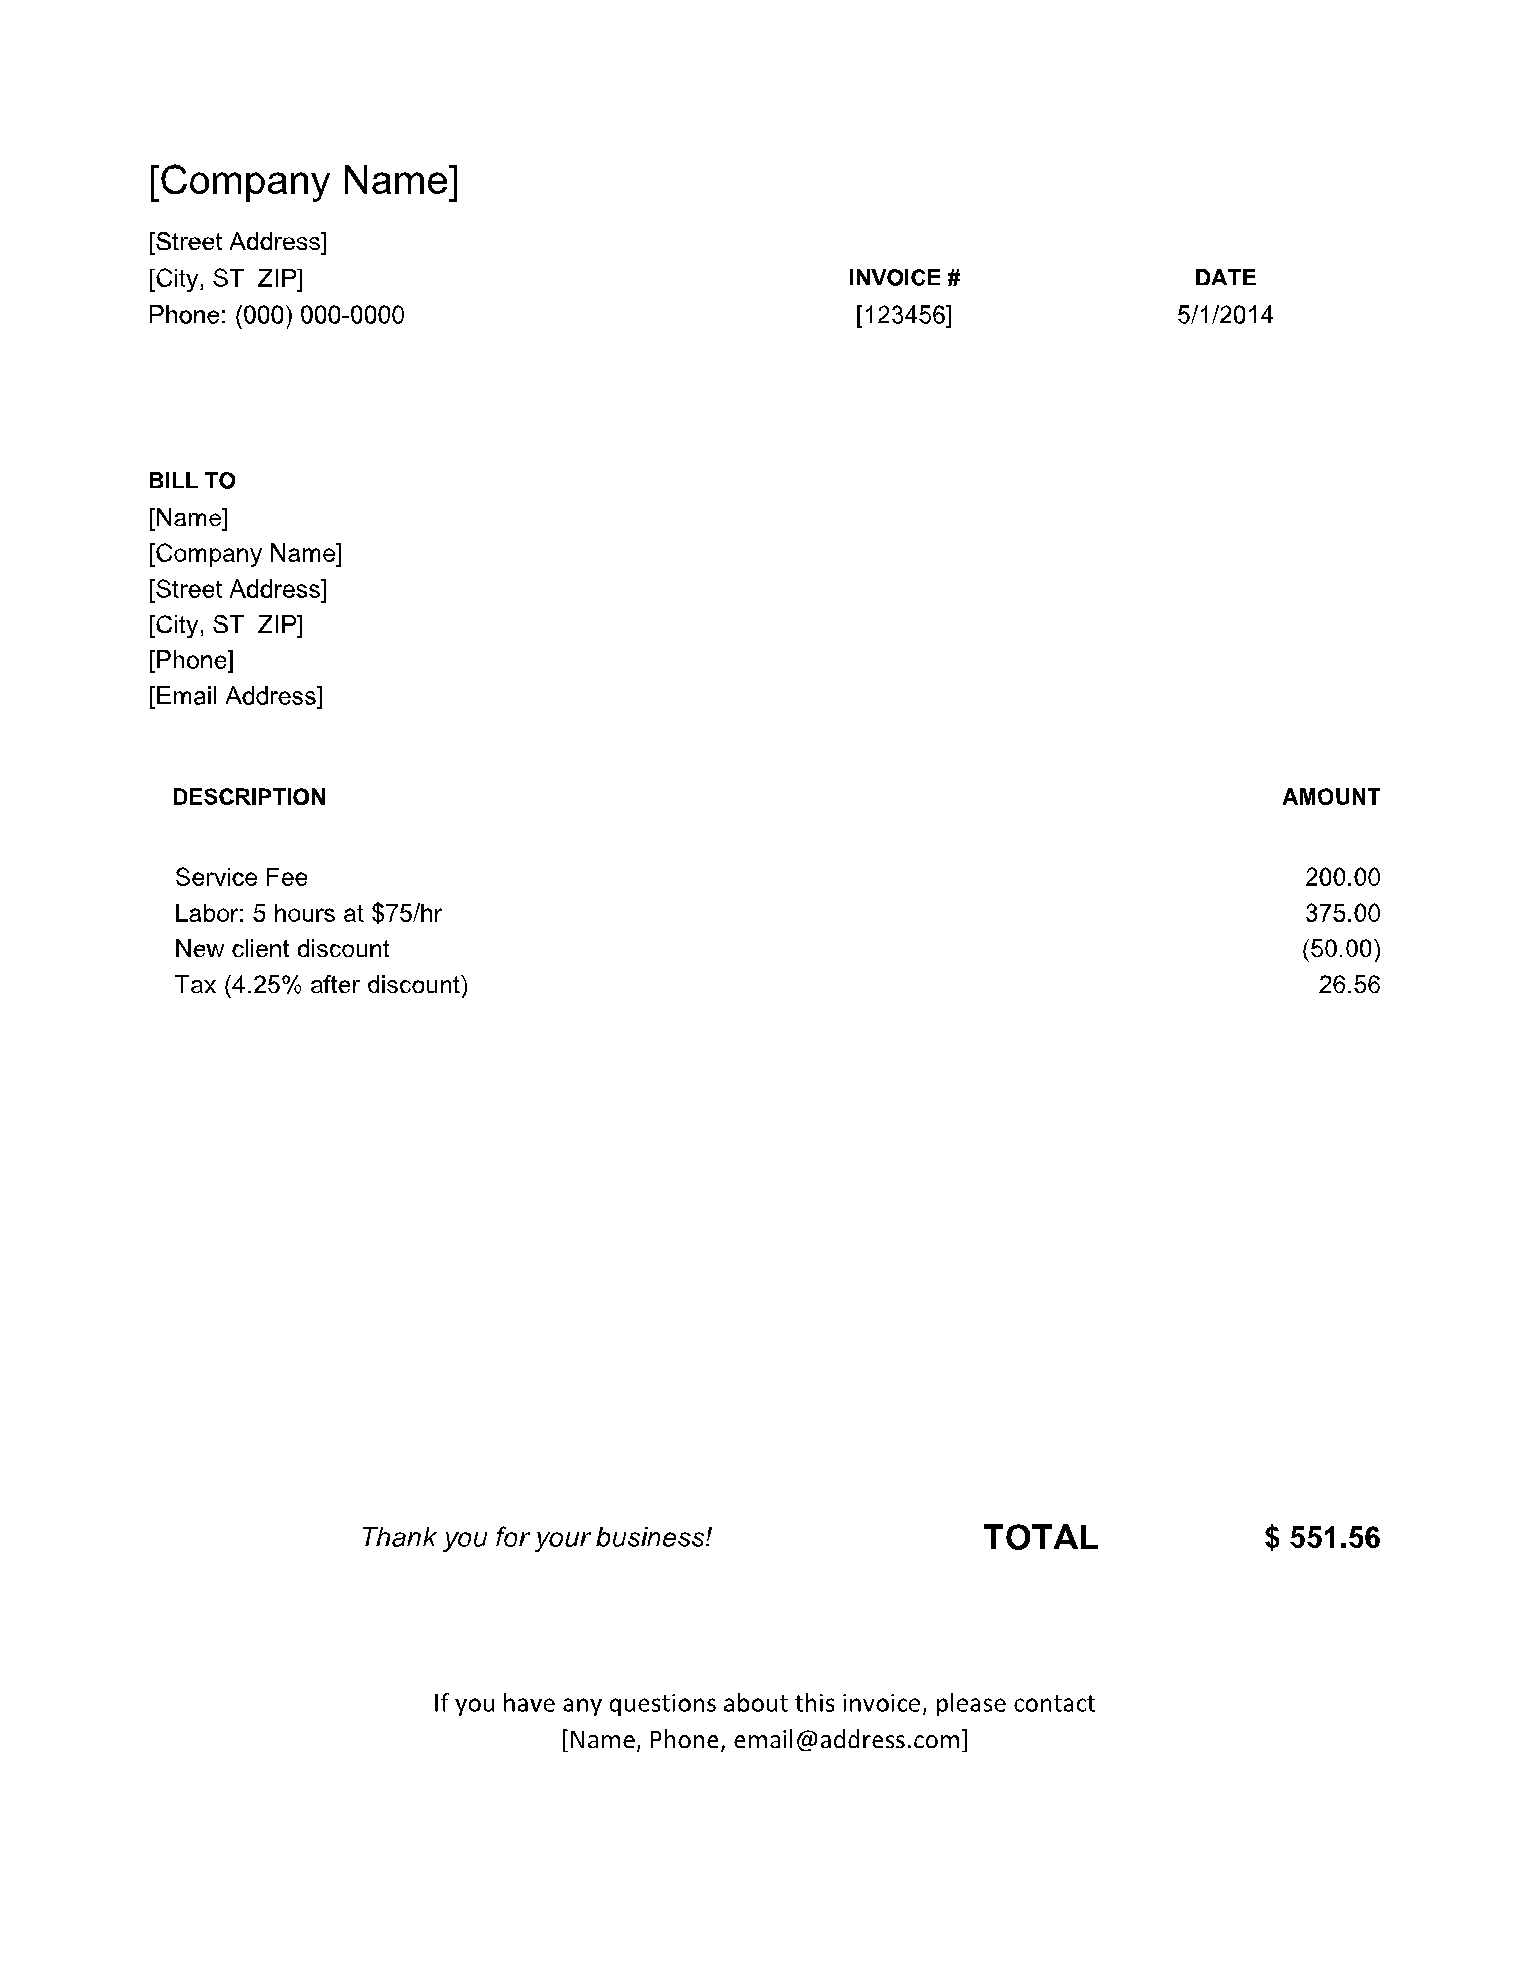 Invoice Format in Word